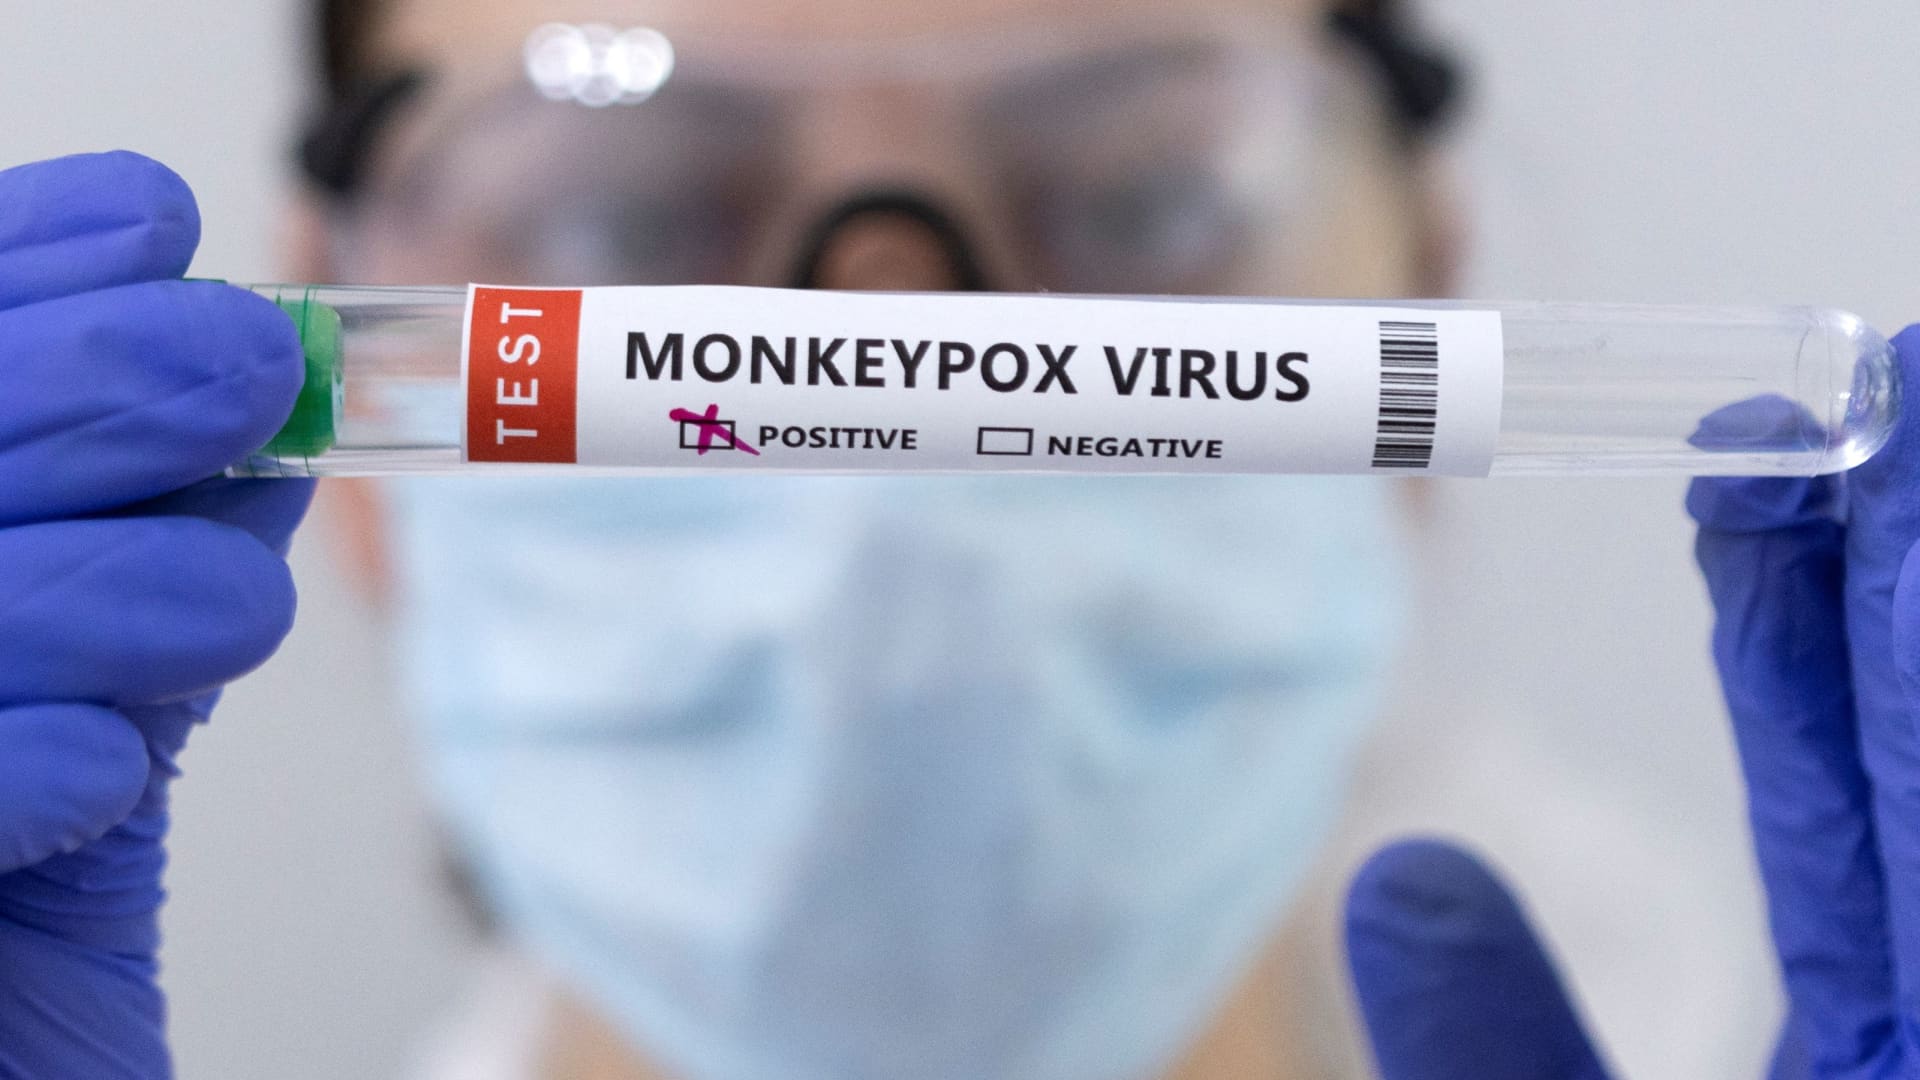 How to protect yourself against monkeypox and what to do if you catch it